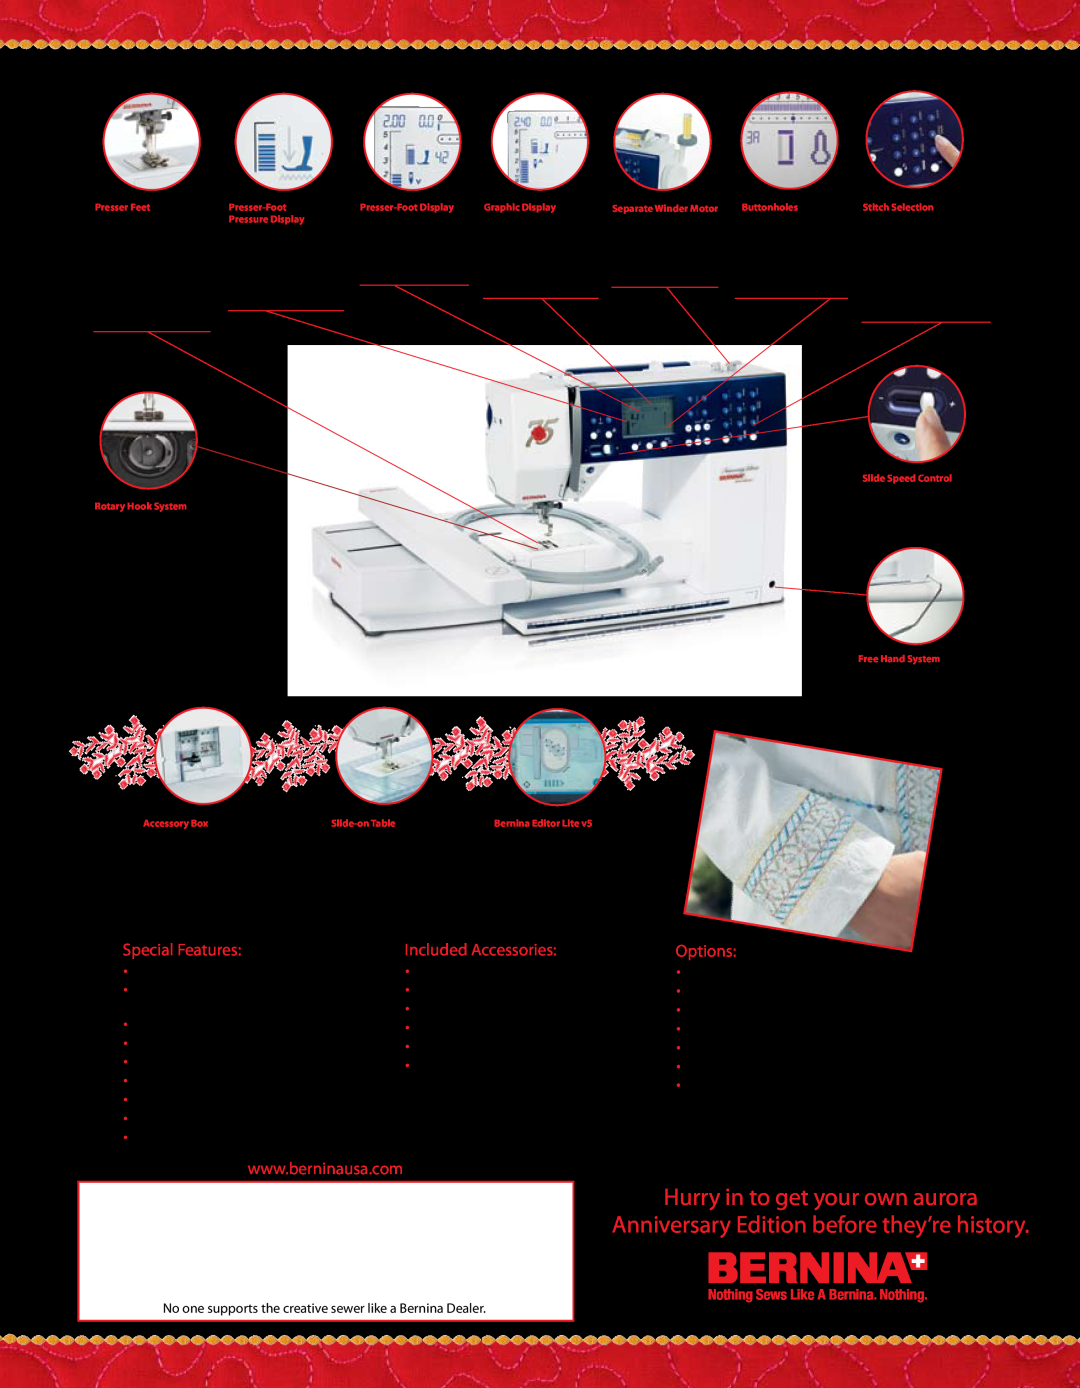 Bernina Embroidery Machine Hurry in to get your own aurora, Anniversary Edition before they’re history, Special Features 